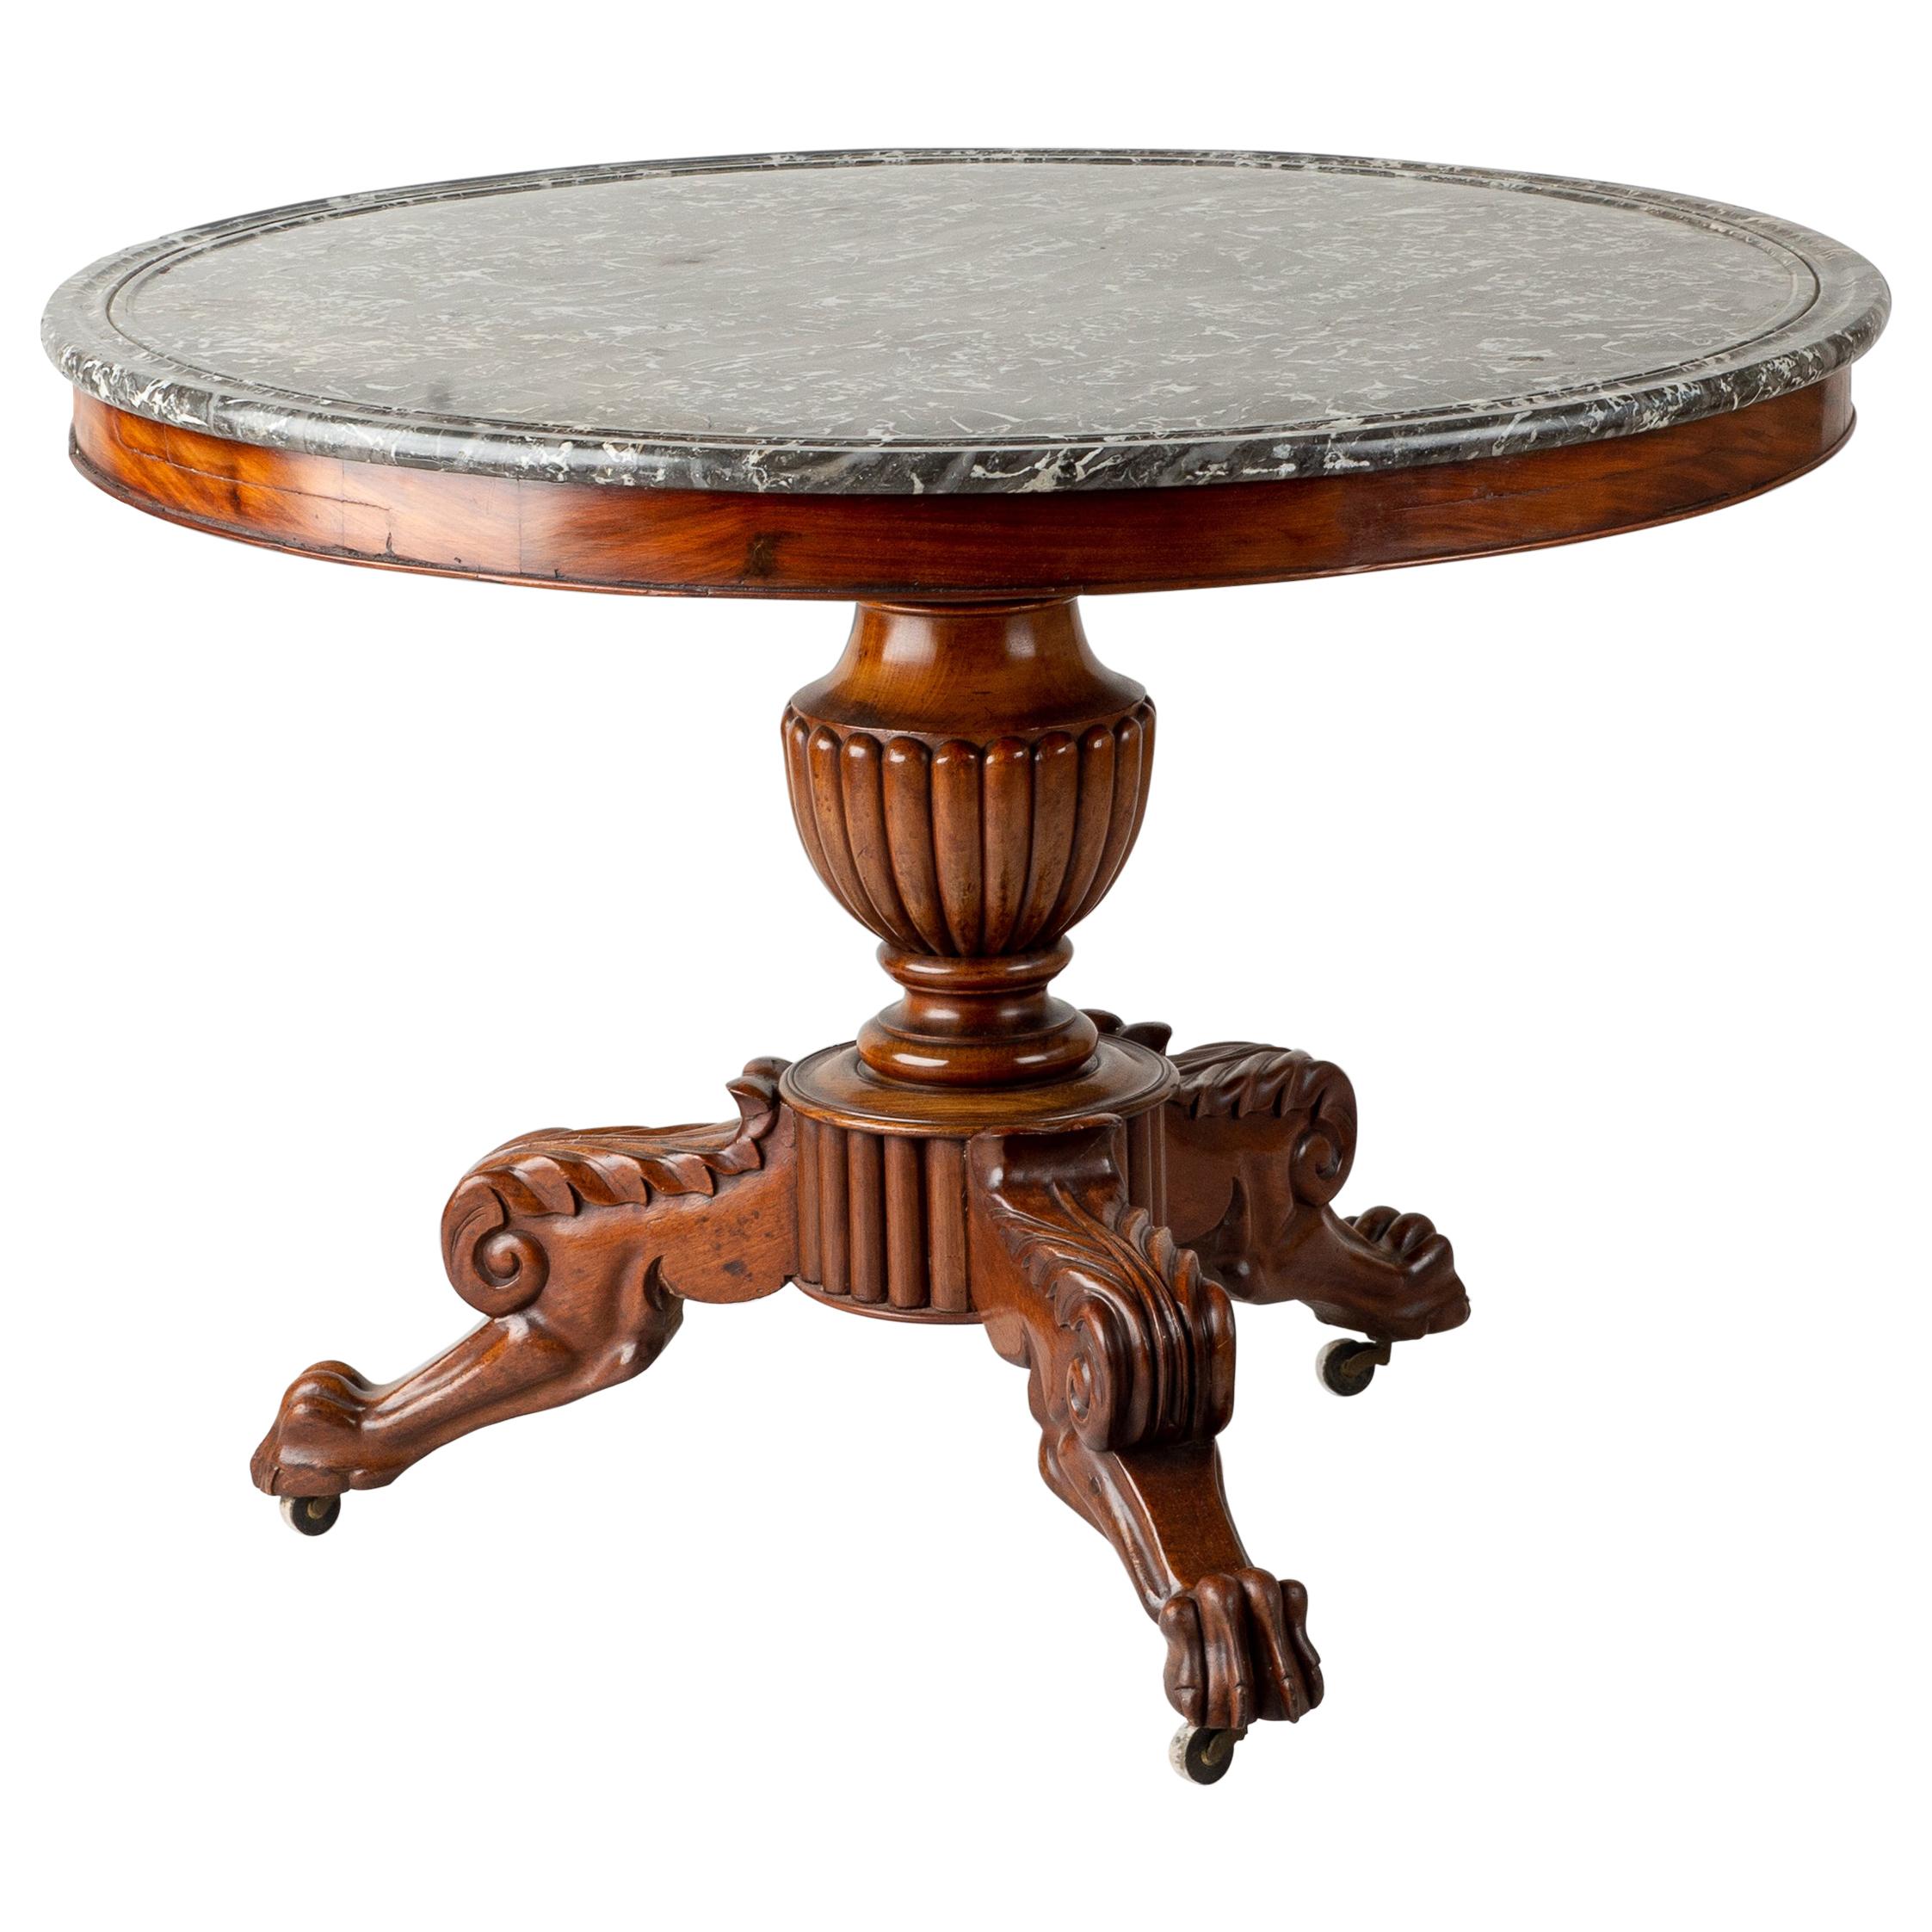 Early 19th Century French Marble Topped Gueridon Table